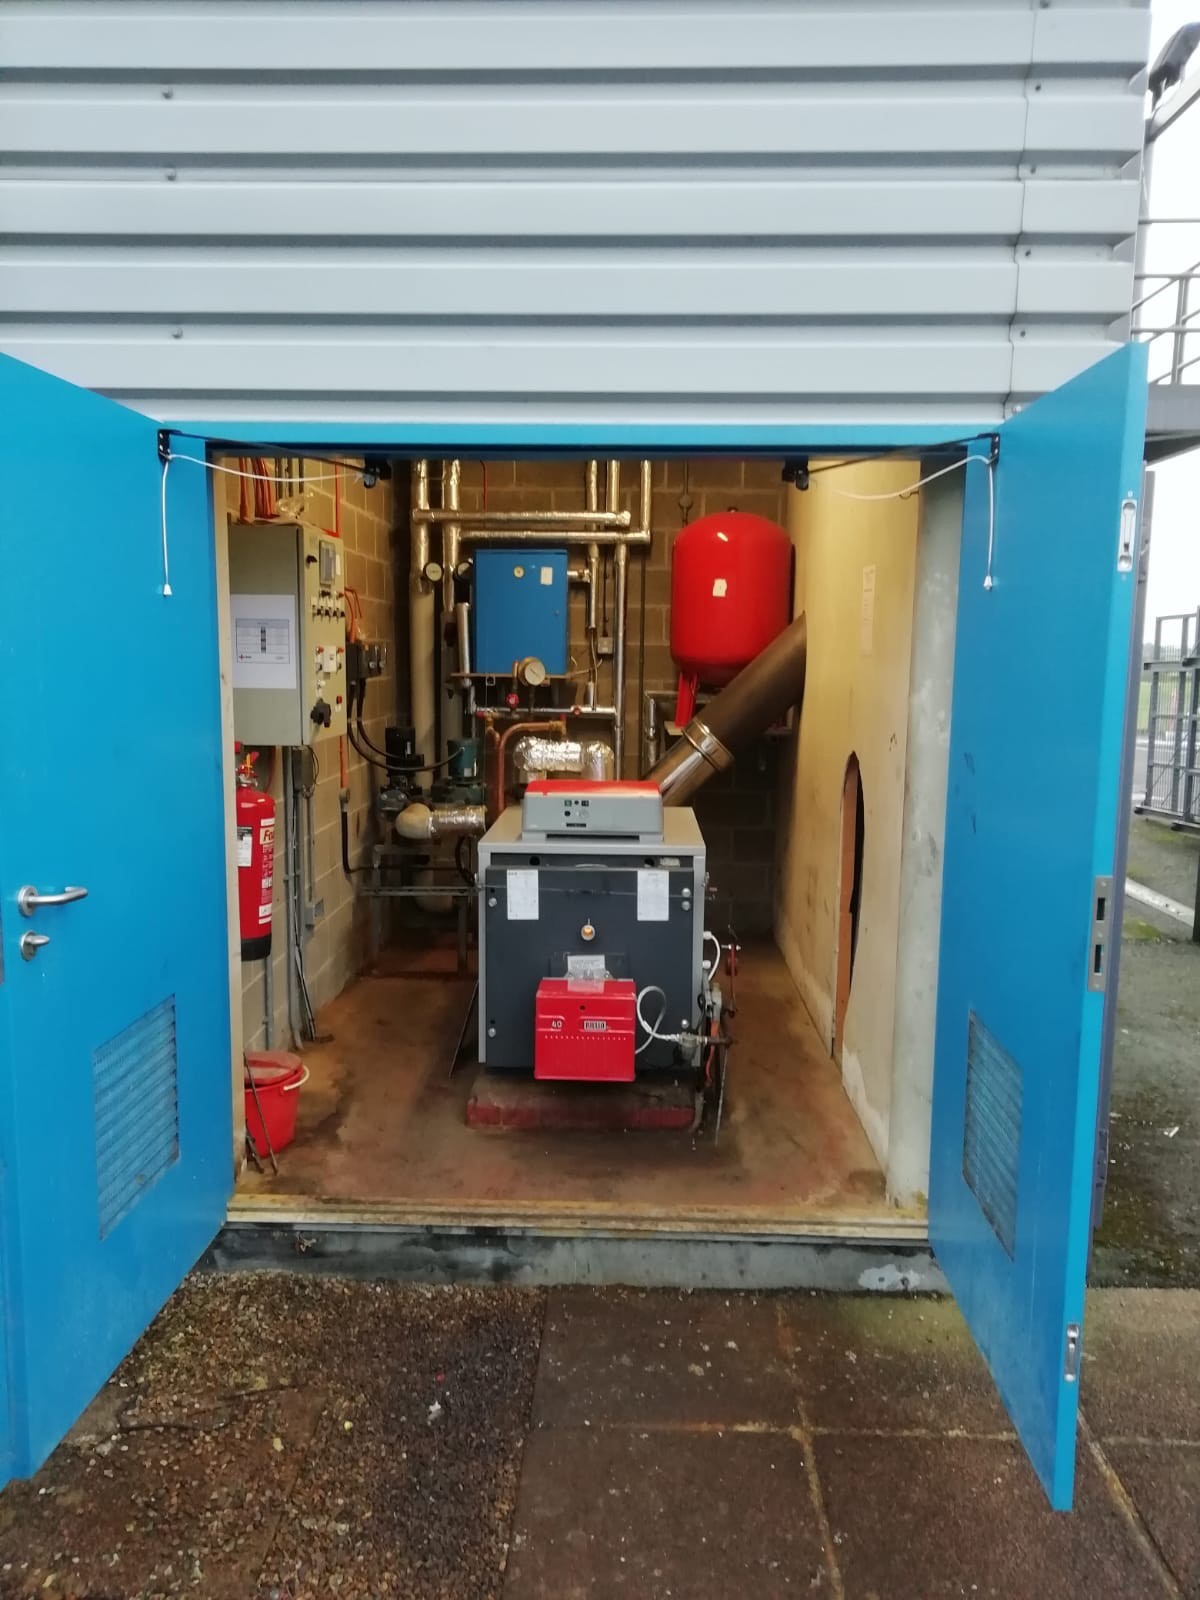 Commercial oil boiler replacement carried out by our commercial industrial team